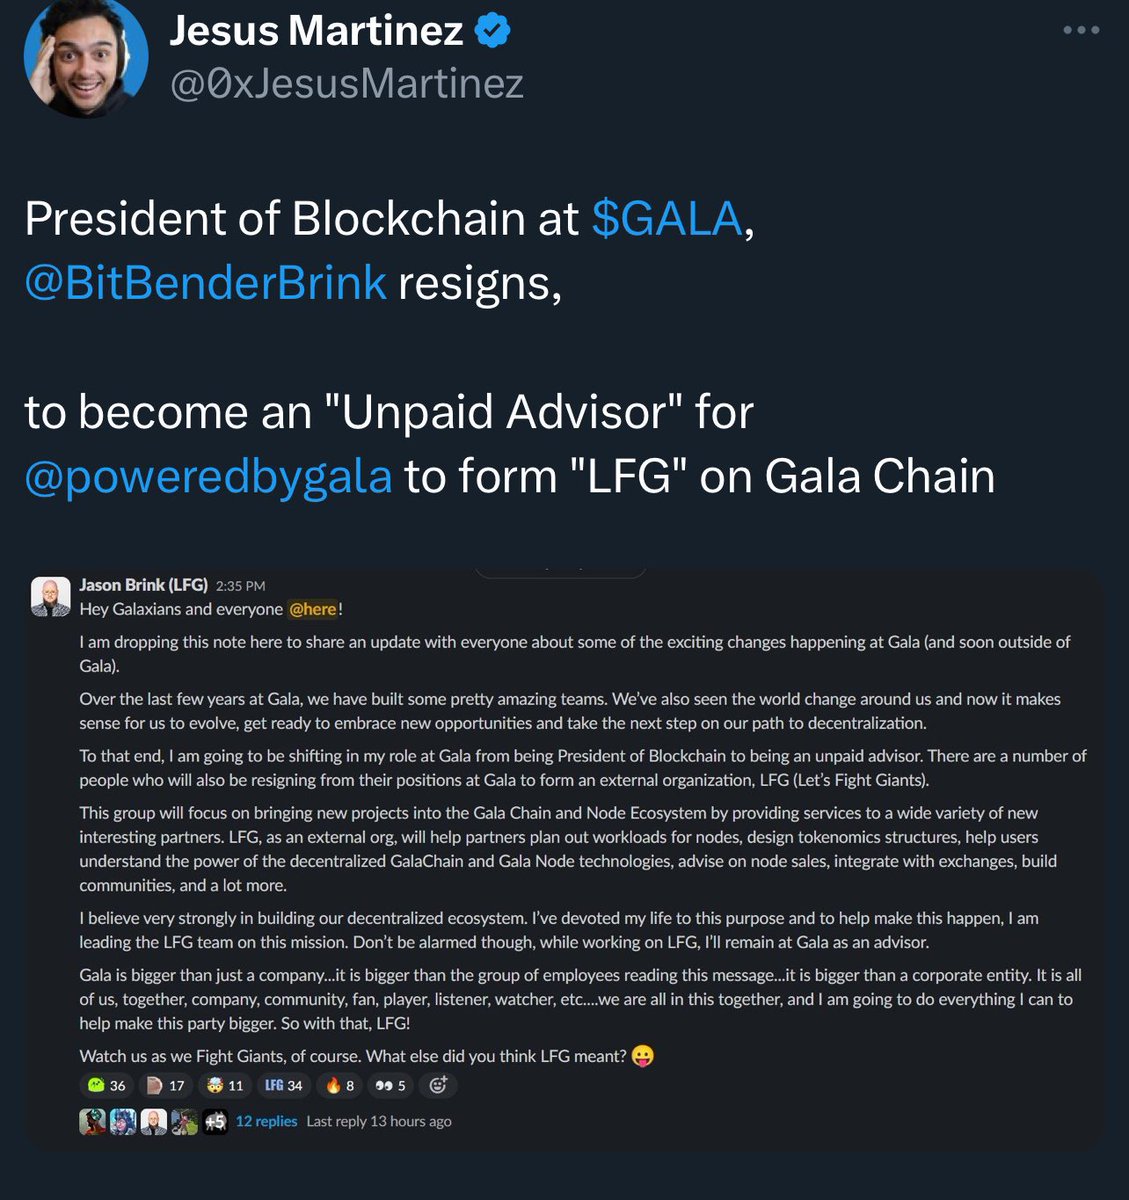 $GALA 

Going from worse to worse…

President now resigns.

They made millions after launching during the heights of the 2021 Bull Market.

There was enough FUD raised during the bear market to warrant no longer holding this token.